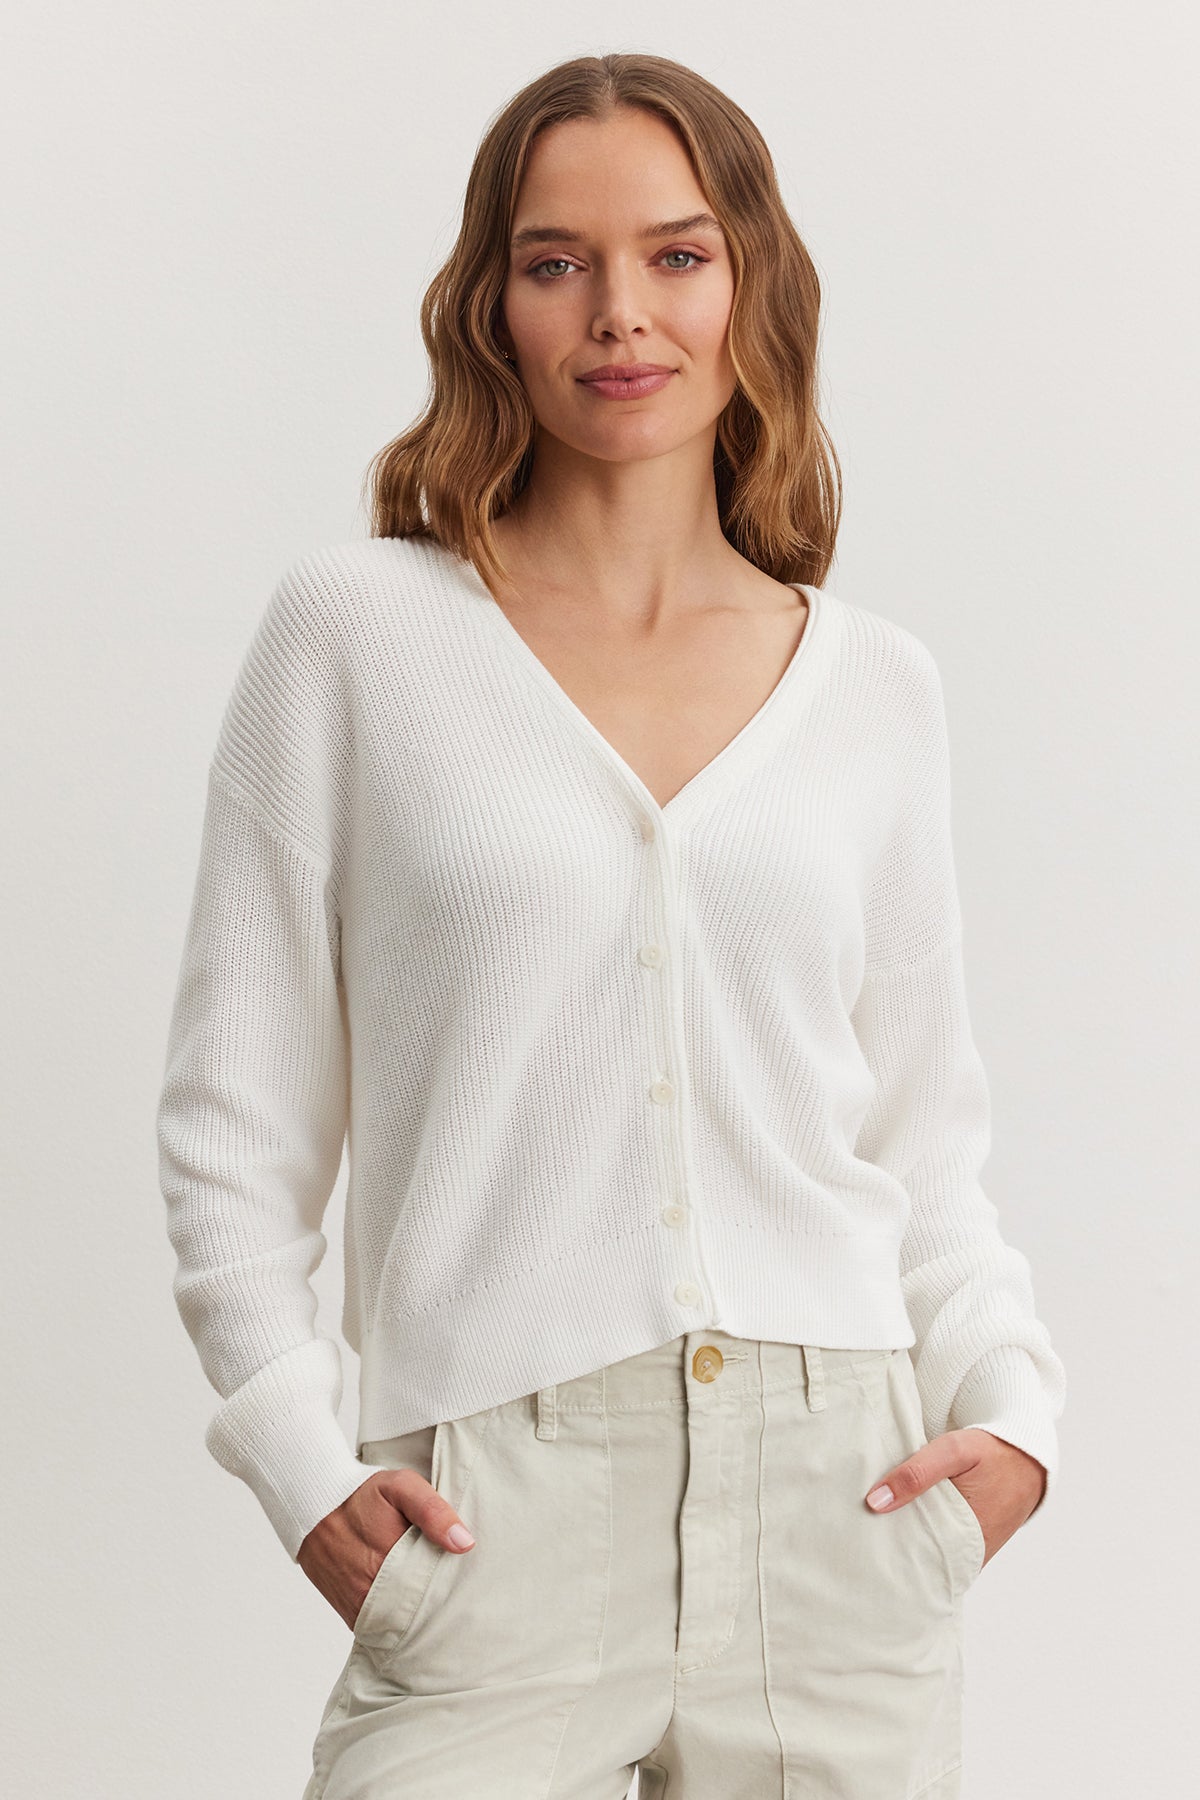 A woman with shoulder-length brown hair wearing a white TAVA Cardigan by Velvet by Graham & Spencer and beige trousers, standing against a plain background.-36909564264641